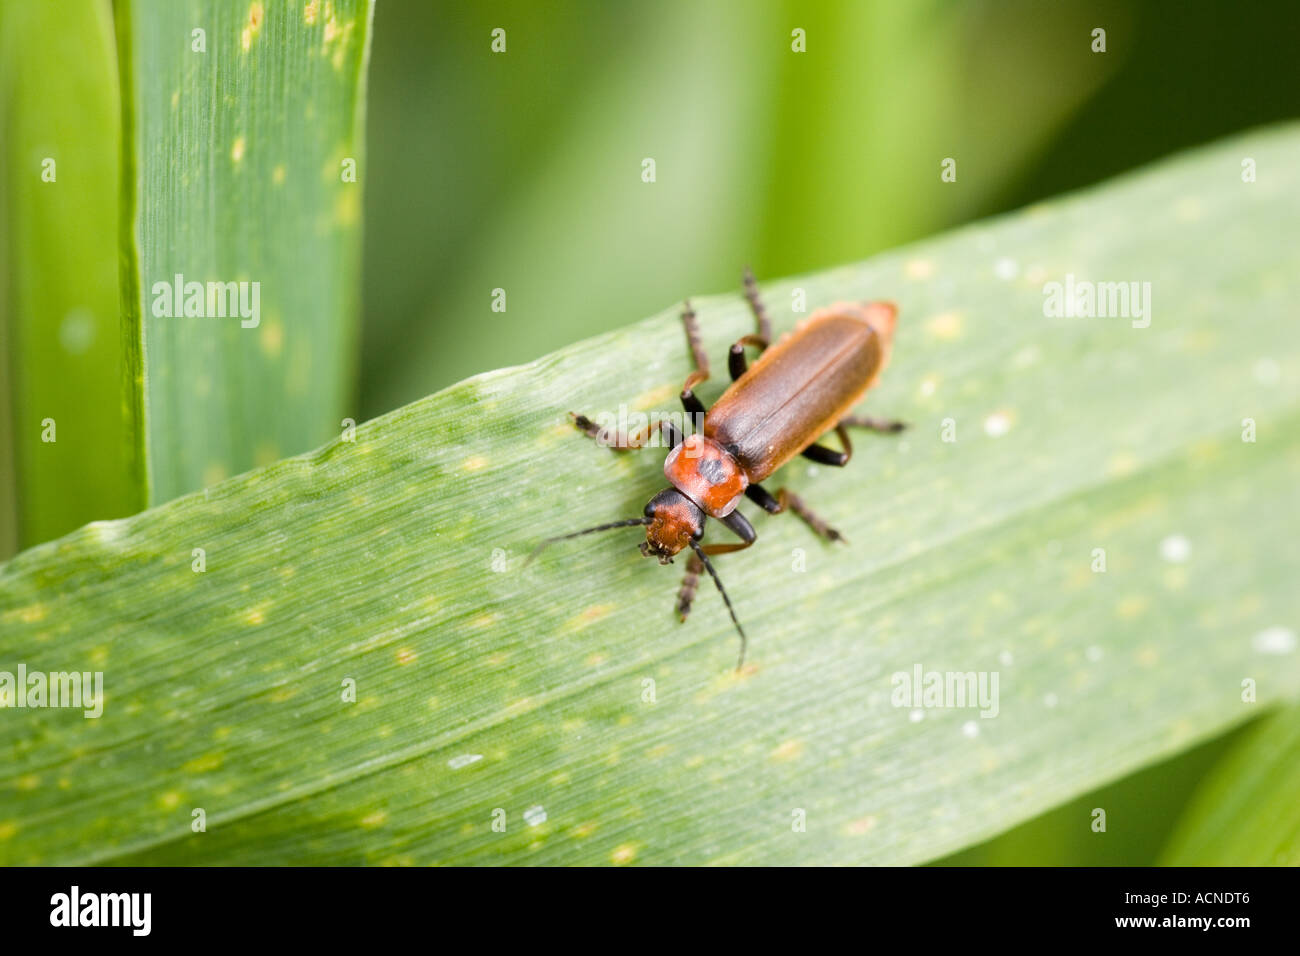 Red soldier beetle on a wheat blade, Spain Stock Photo